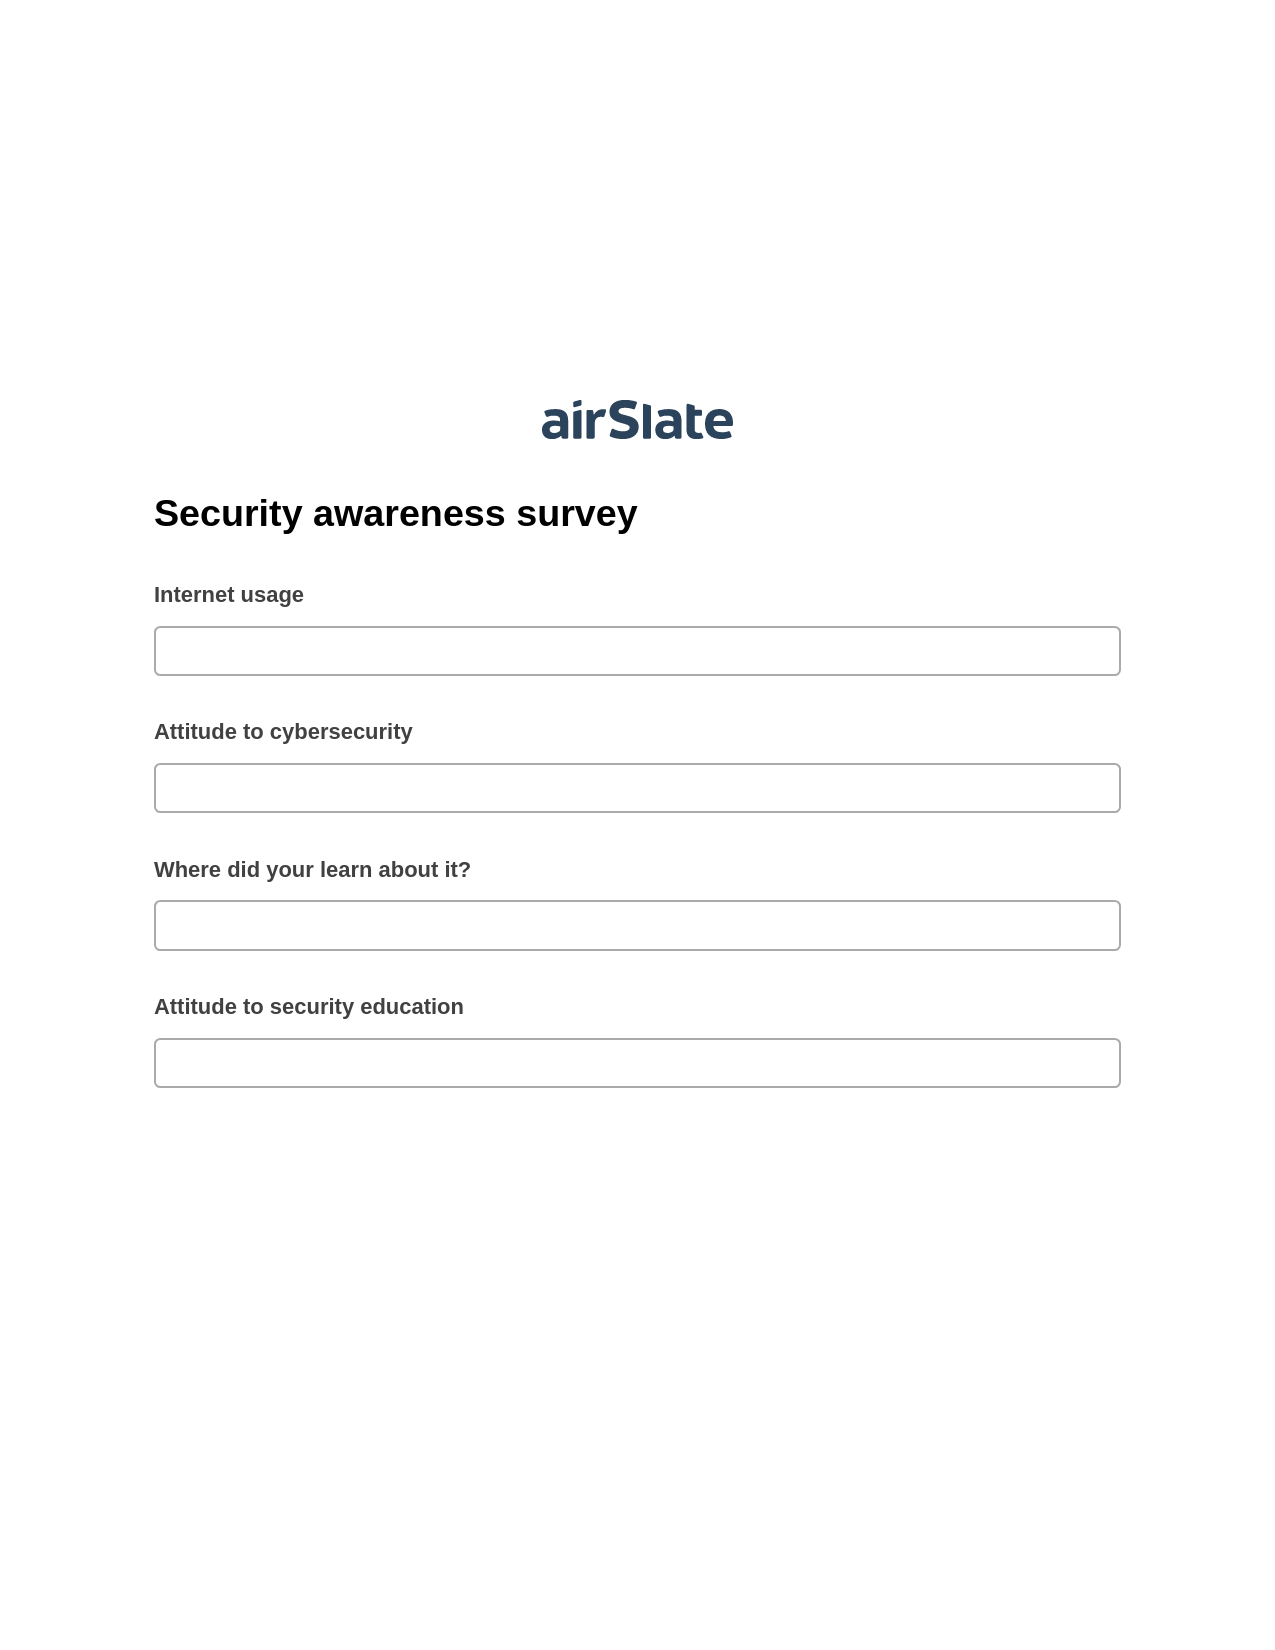 Security awareness survey Pre-fill from CSV File Dropdown Options Bot, Lock the slate bot, Export to Formstack Documents Bot